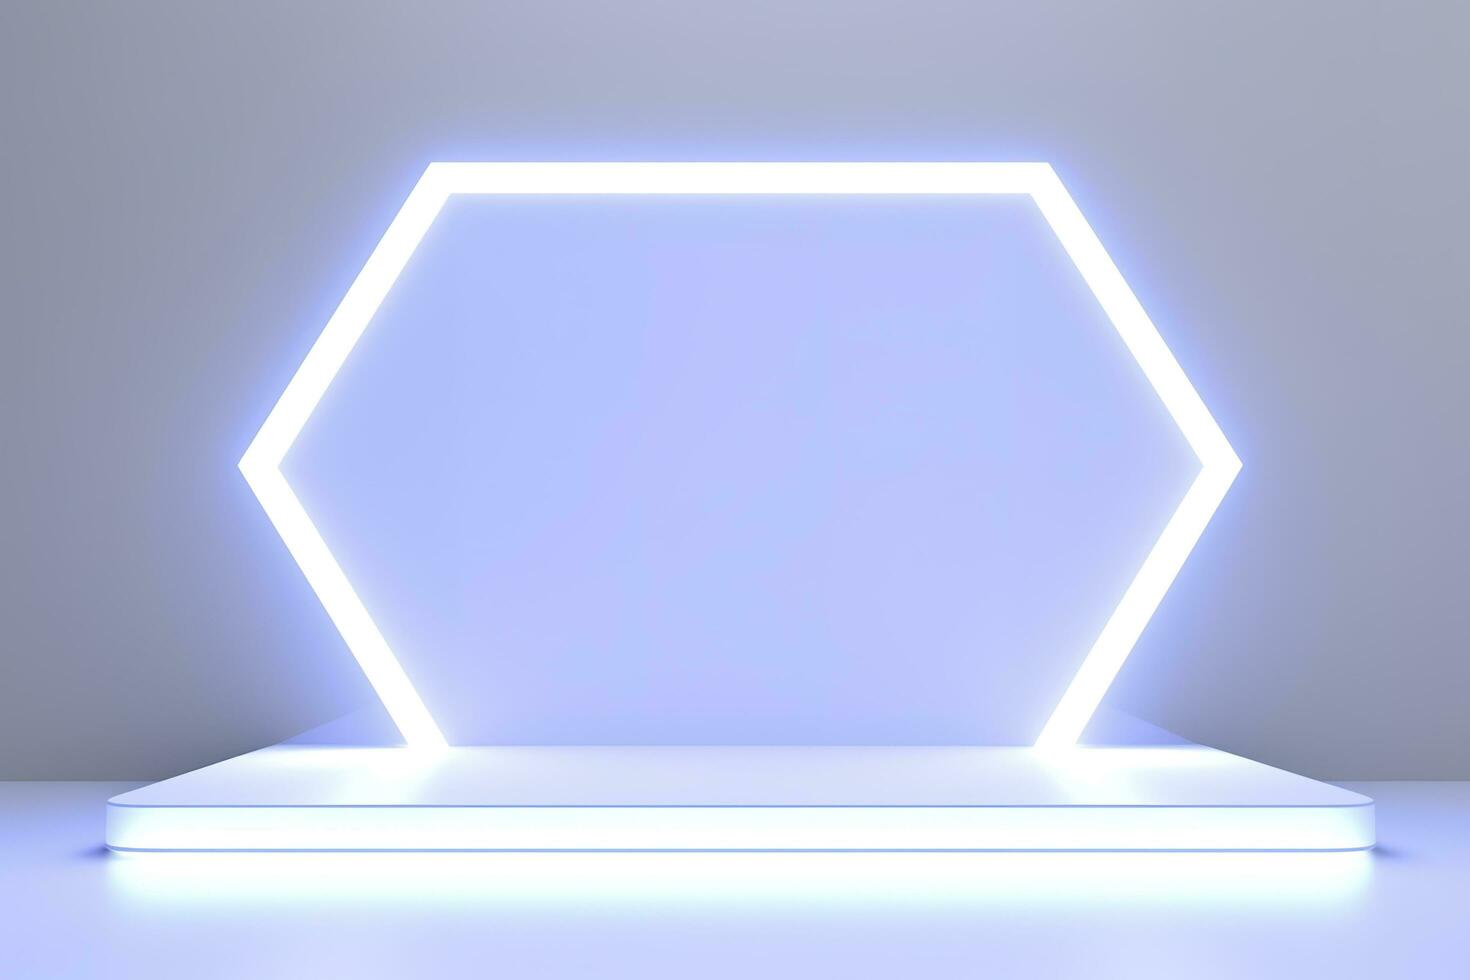 Realistic podium display with neon white lights, Product display background with light frame, White prodium product display with light effect, neon lights background, generate ai photo